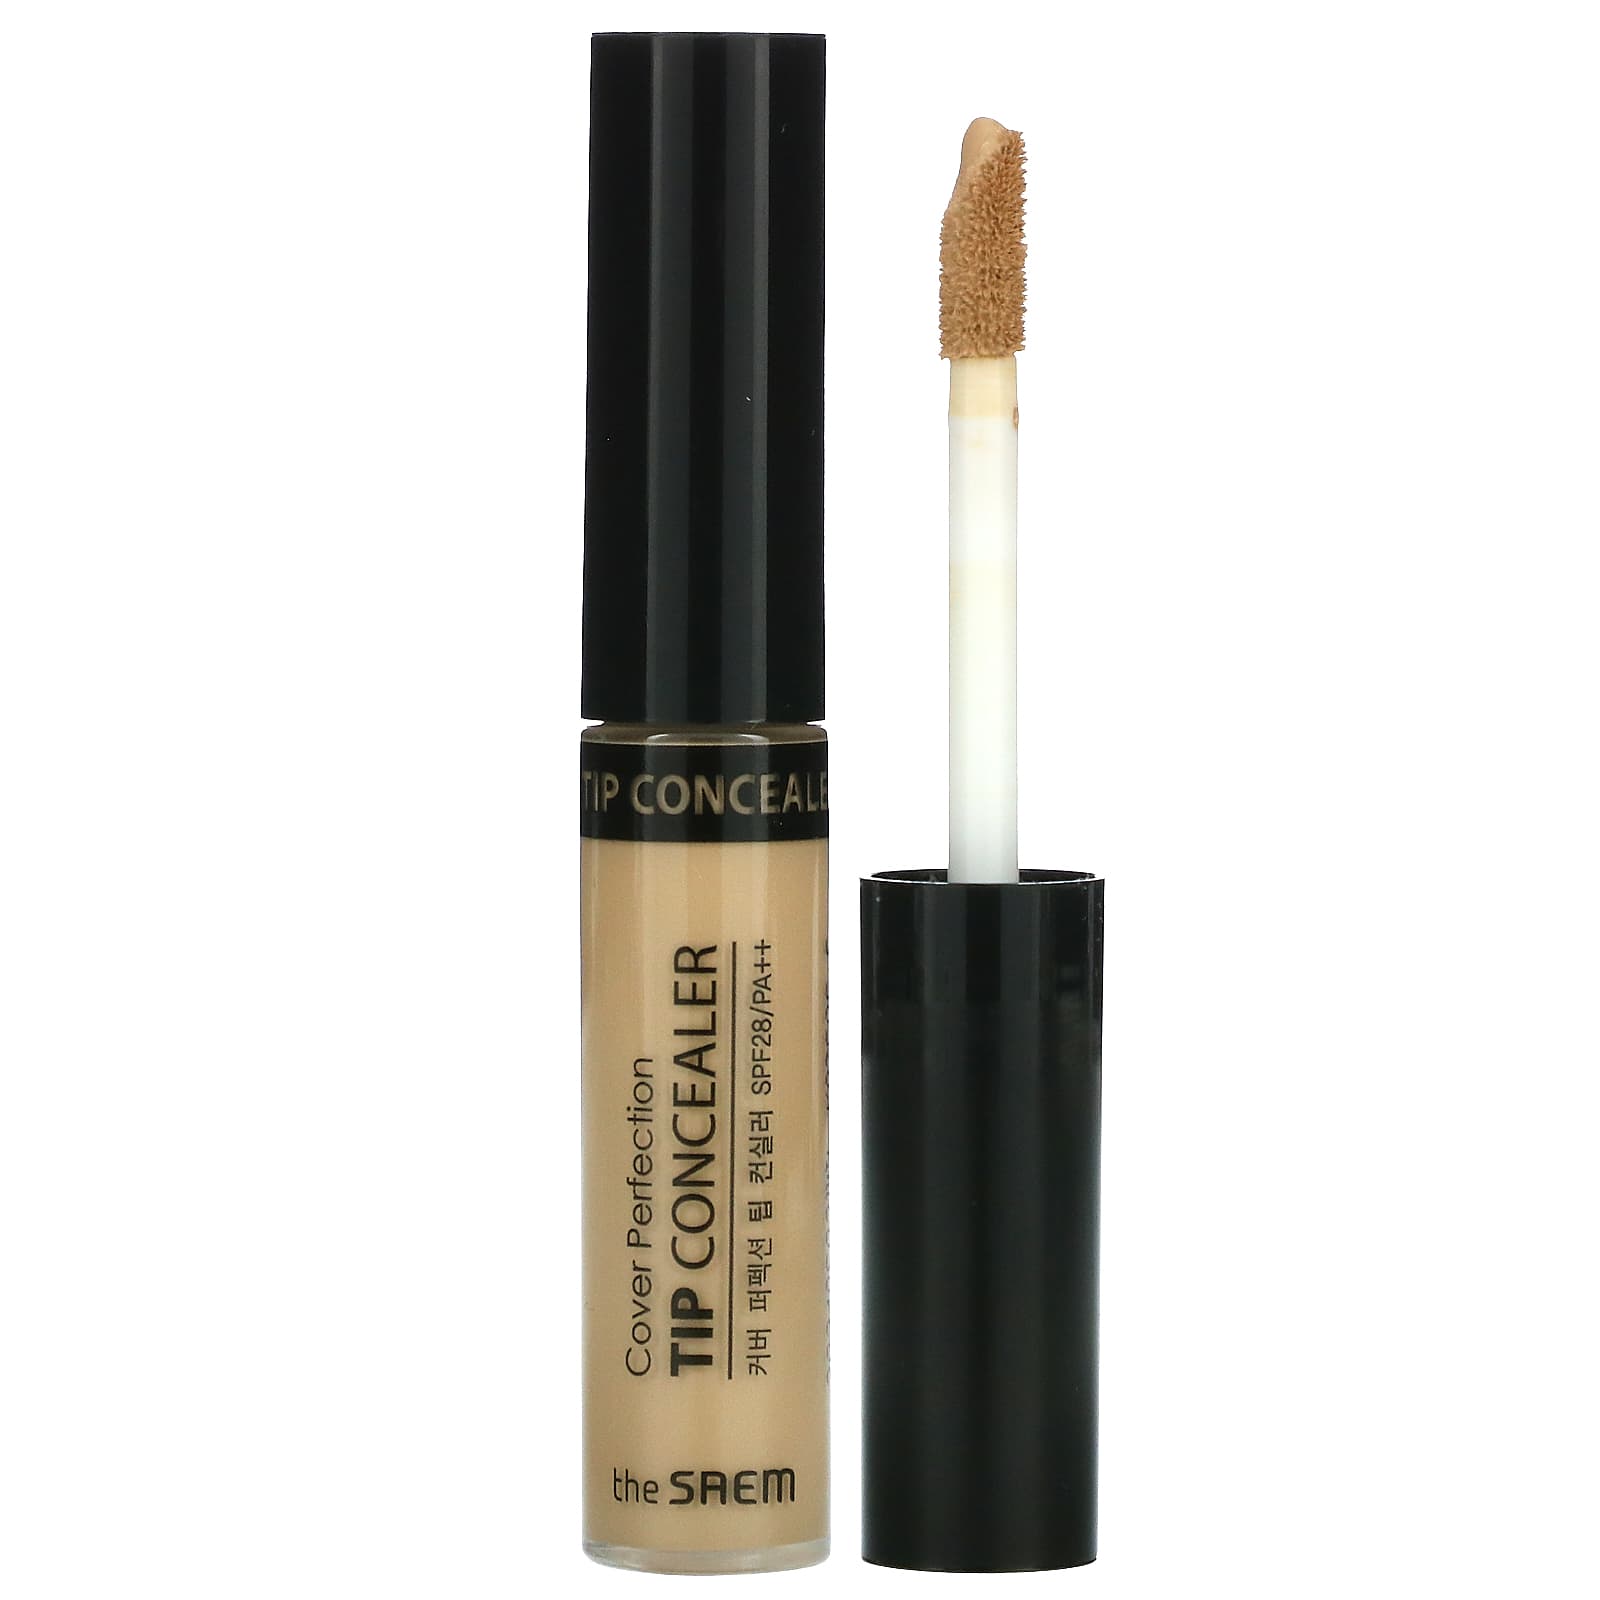 Cover Perfection, Tip Concealer, SPF 28 PA++, 1.5 Natural Beige